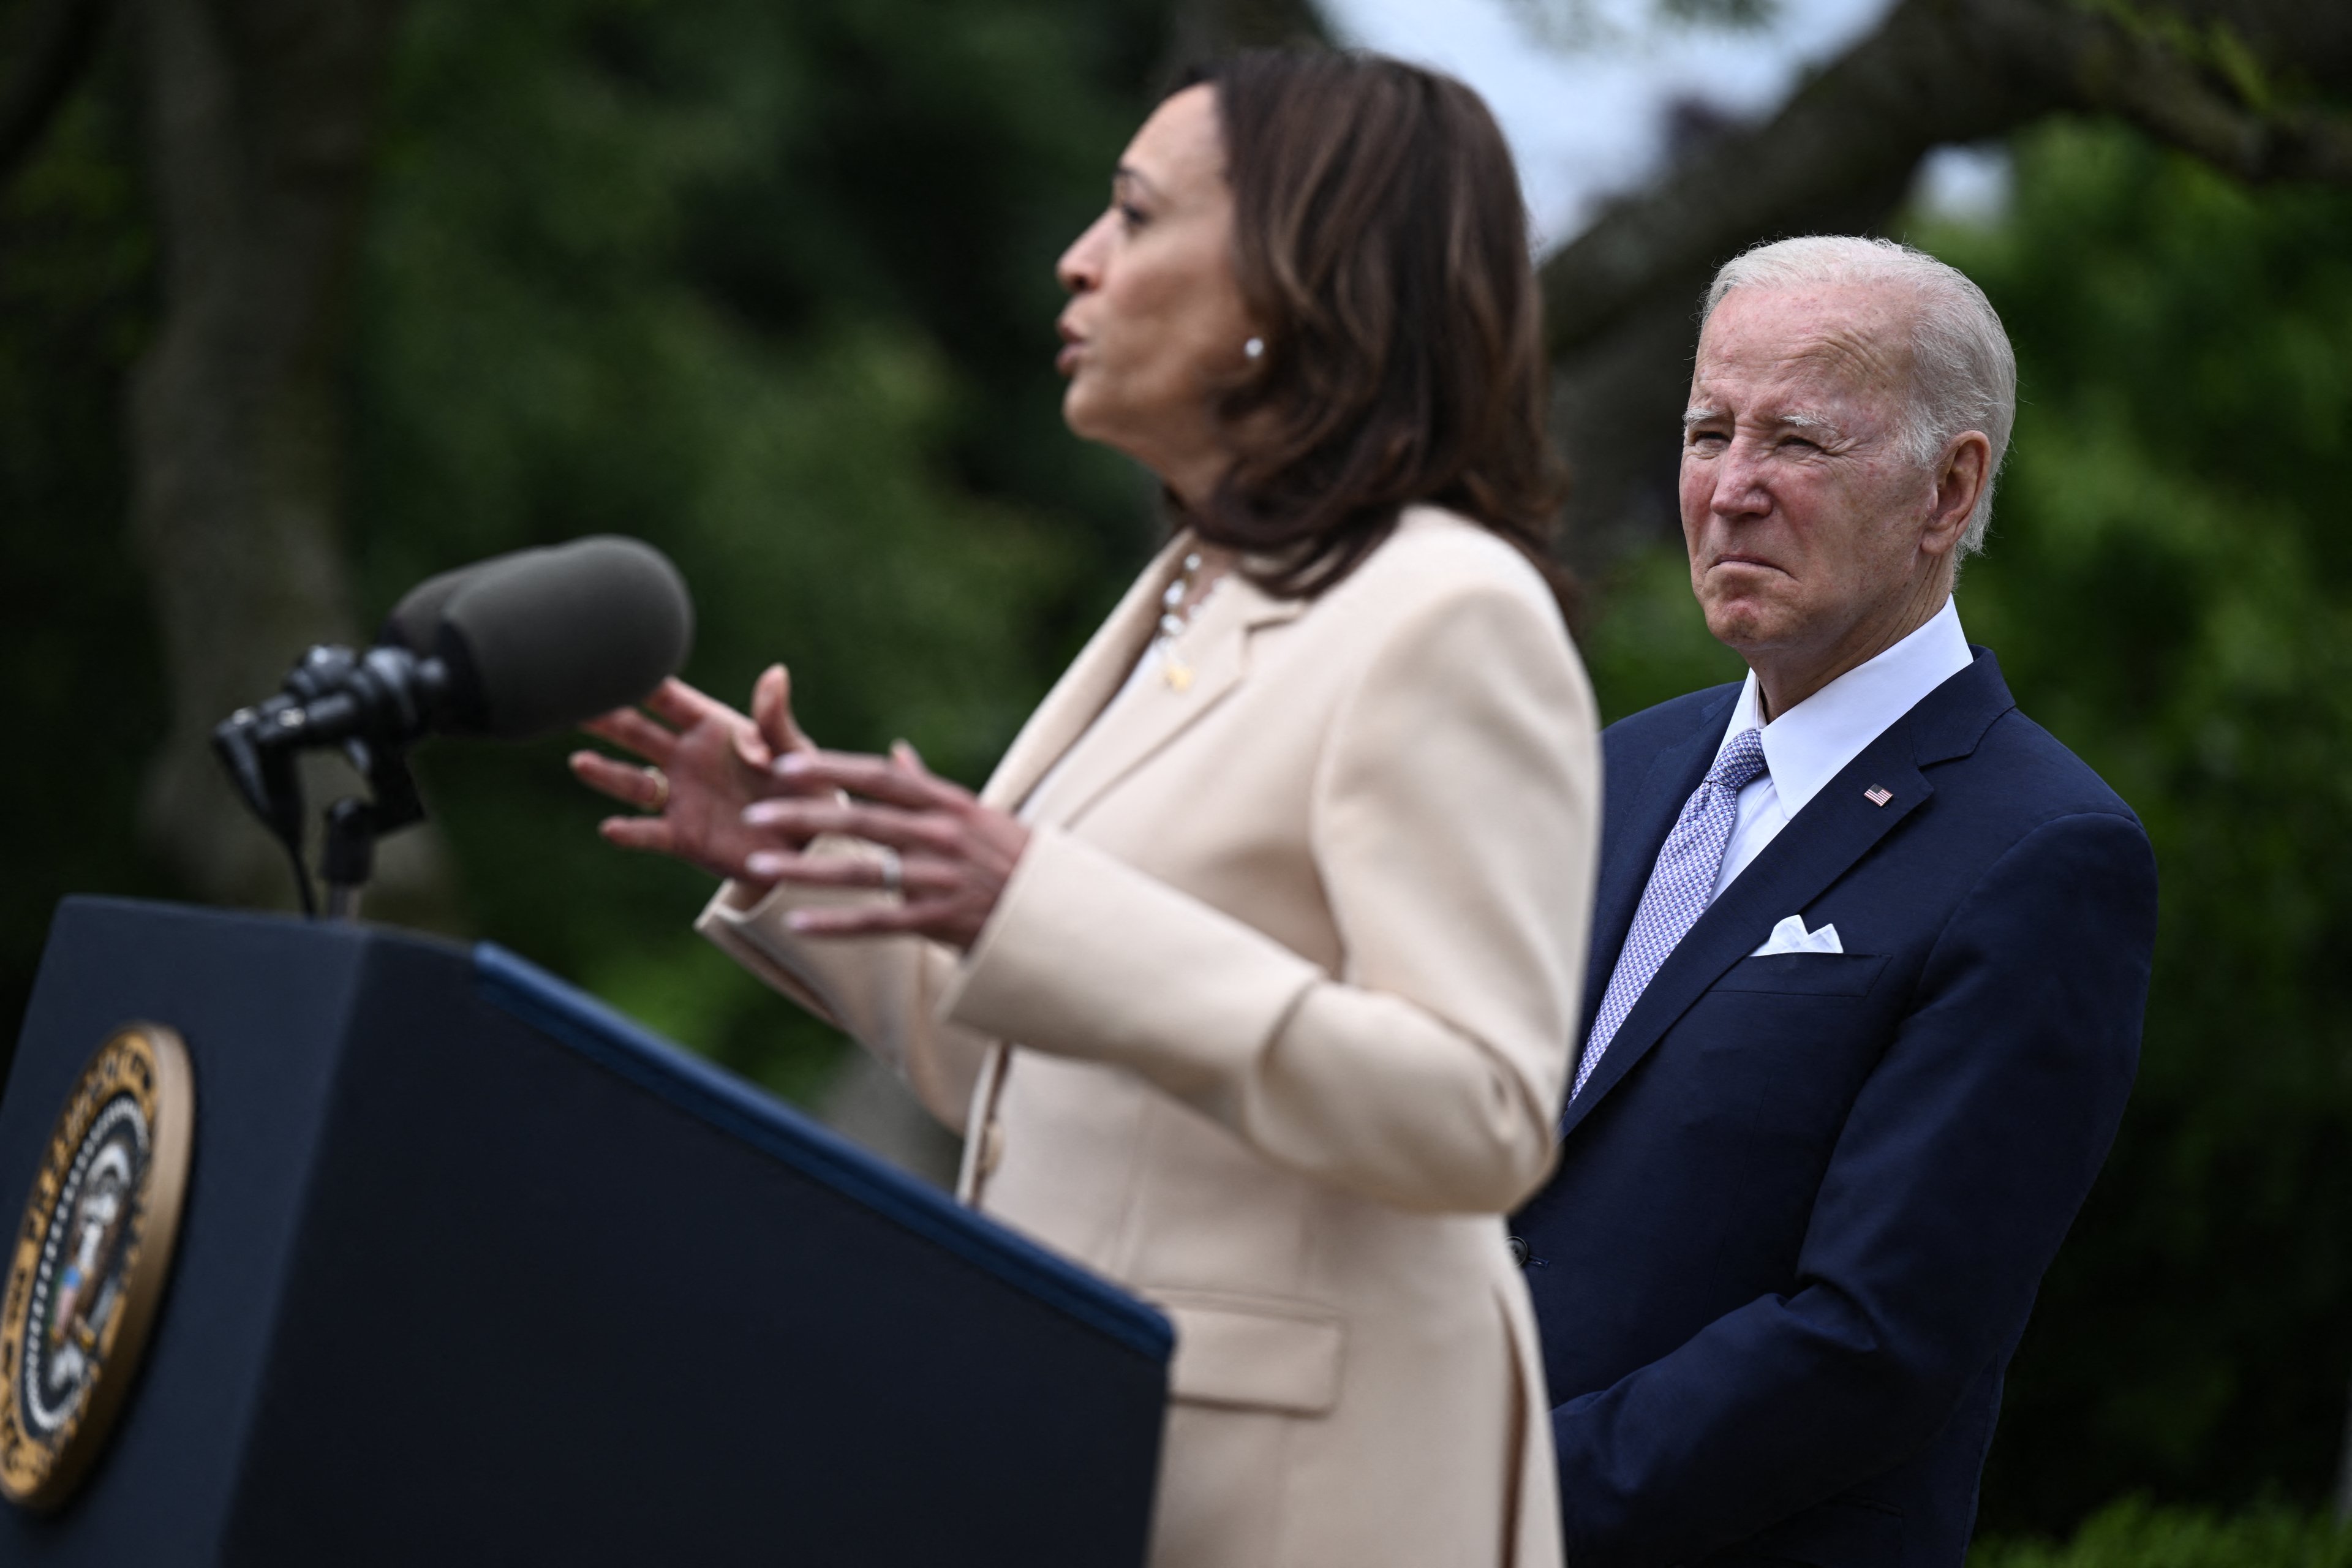 (FILES) US President Joe Biden looks on as US Vice President Kamala Harris delivers remarks during National Small Business Week in the Rose Garden of the White House in Washington, DC, on May 1, 2023. Joe Biden on July 21, 2024 dropped out of the US presidential election and endorsed Vice President Kamala Harris as the Democratic Party's new nominee, in a stunning move that upends an already extraordinary 2024 race for the White House. Biden, 81, said he was acting in the "best interest of my party and the country" by bowing to weeks of pressure after a disastrous June debate against Donald Trump stoked worries about his age and mental fitness. (Photo by Brendan SMIALOWSKI / AFP)